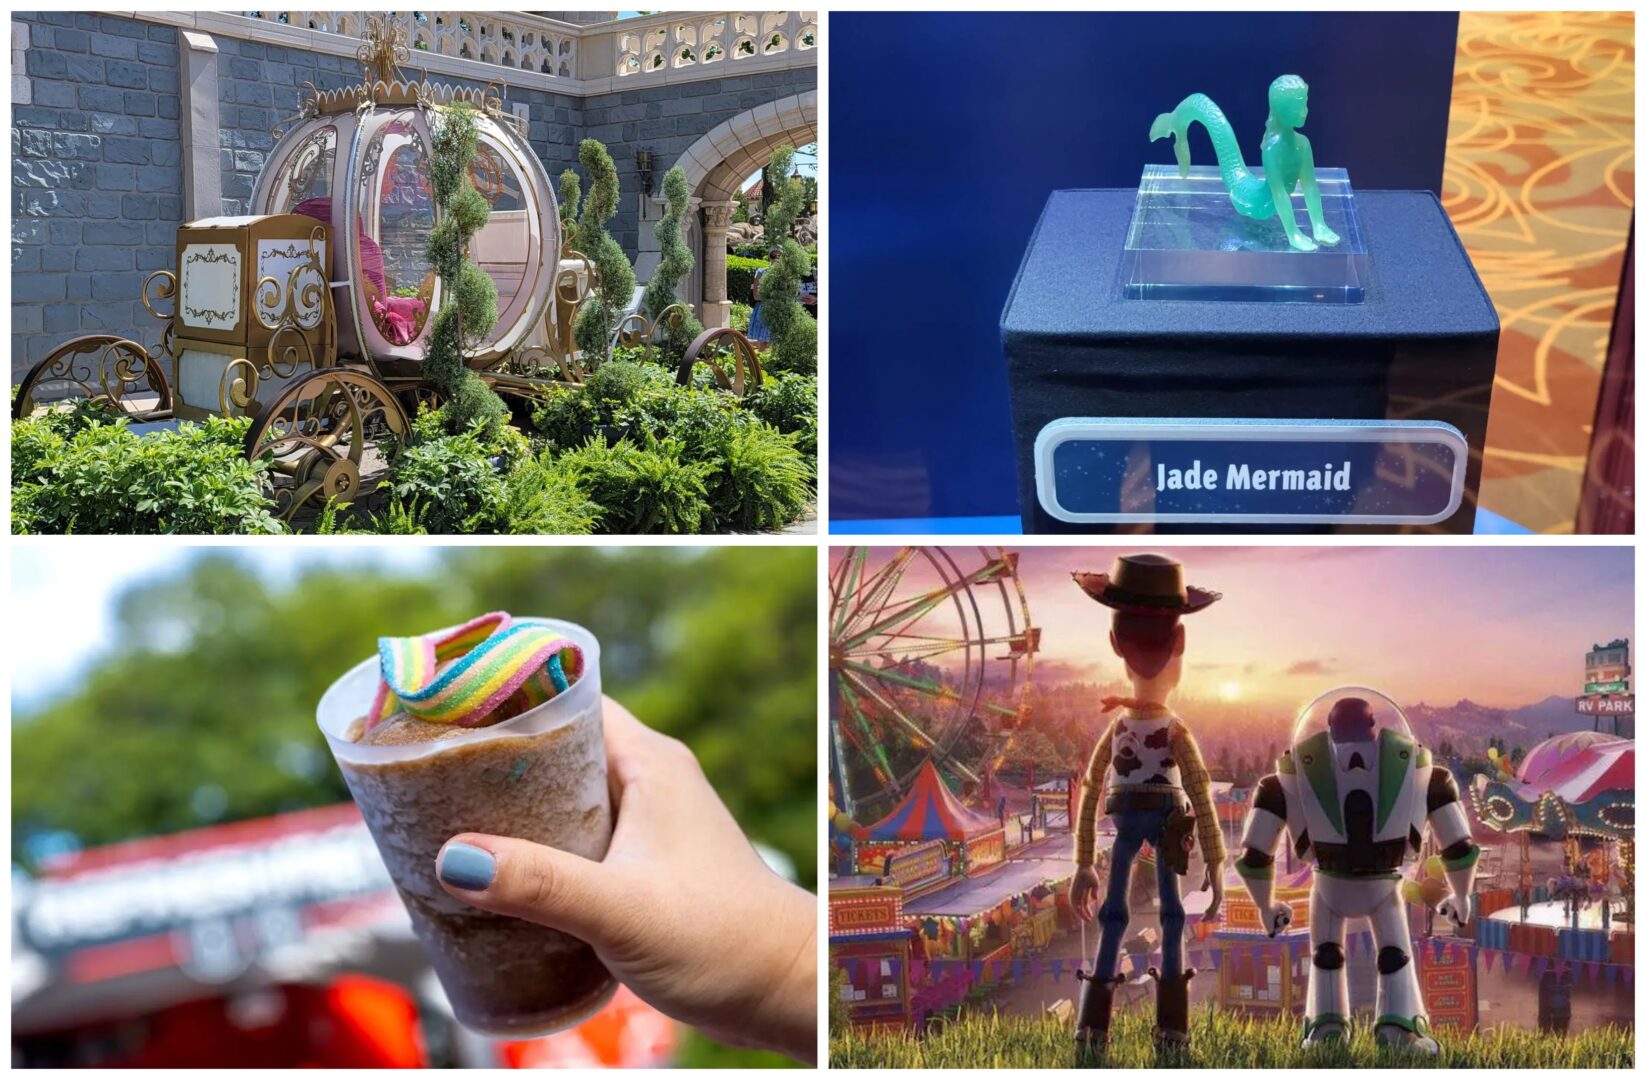 Disney News Highlights: Cinderella Carriage Returns to Disney’s Magic Kingdom, Tim Allen Gives Update on Toy Story 5, The Little Mermaid Takes Over the News, Monsters U. Spirit Jersey